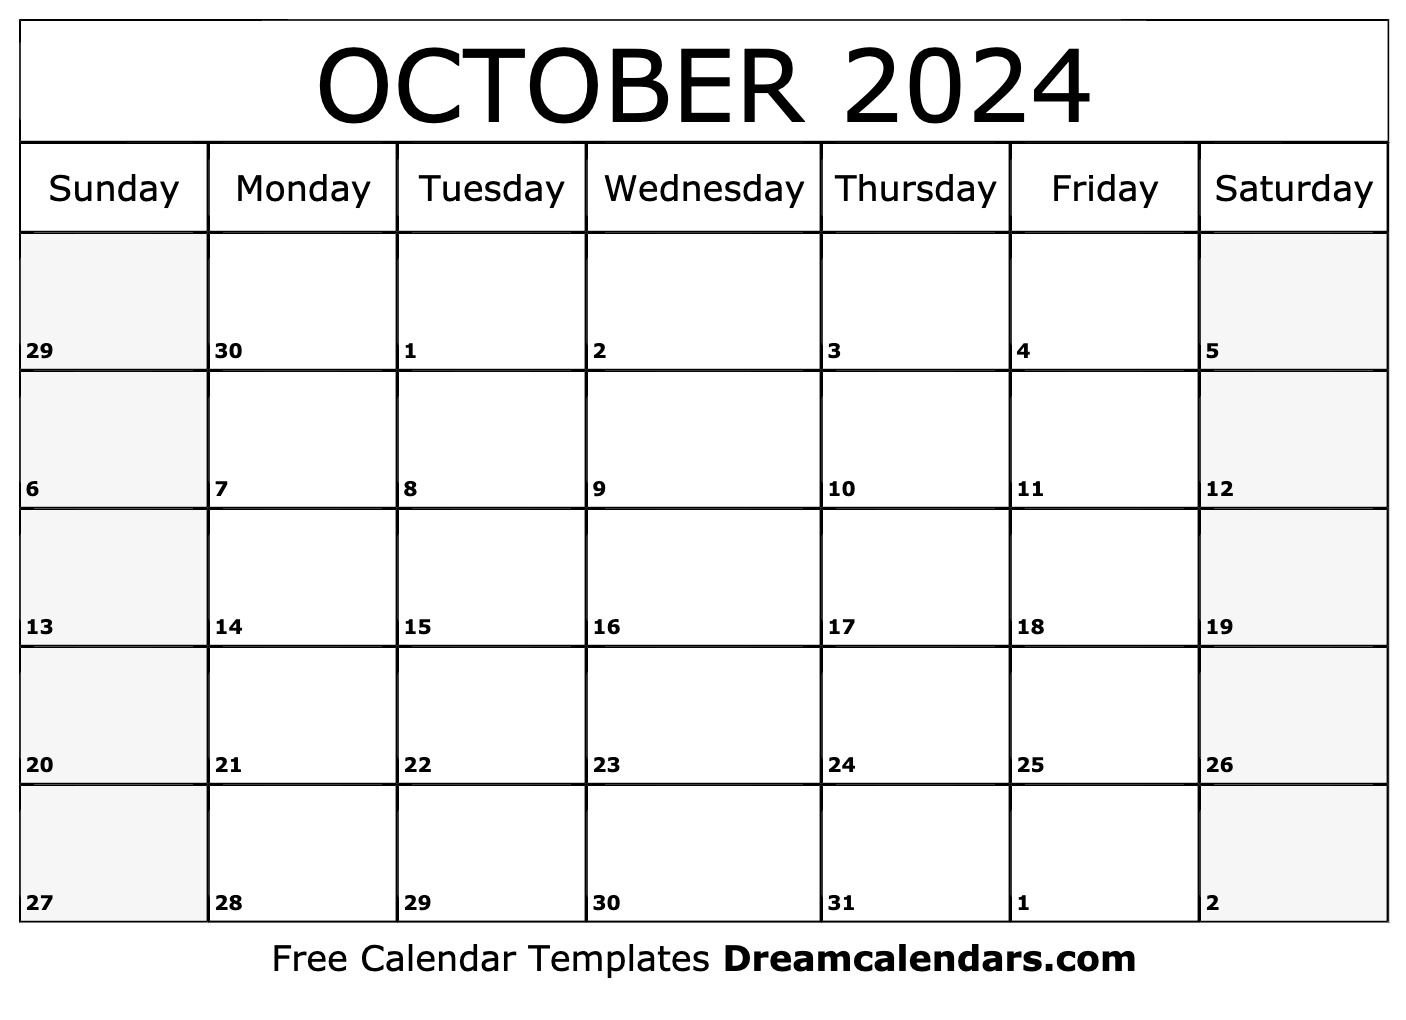 October 2024 Calendar | Free Blank Printable With Holidays for Printable October Calendar 2024